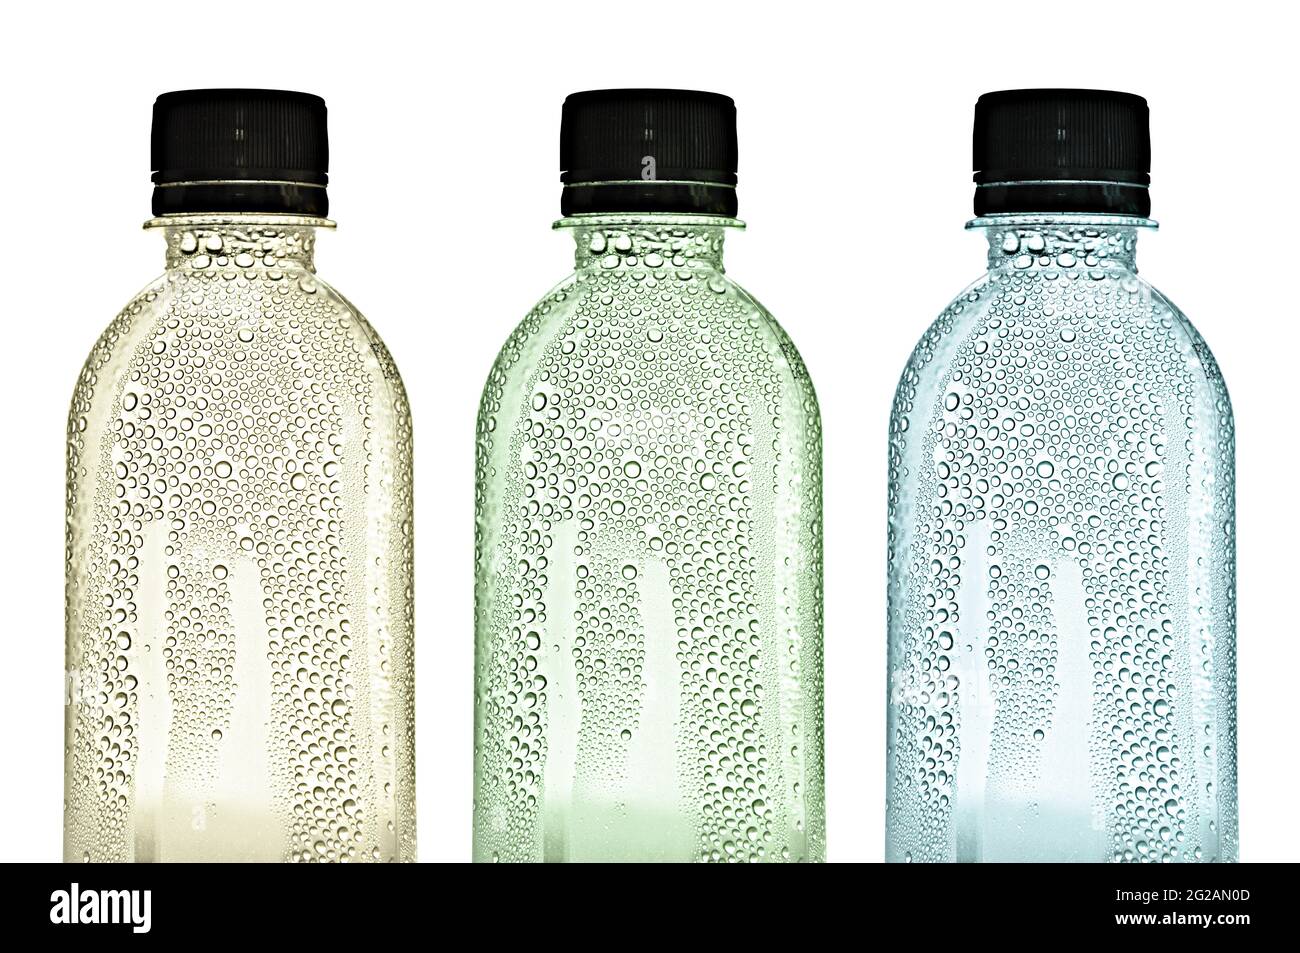 Plastic bottle with water drops Stock Photo